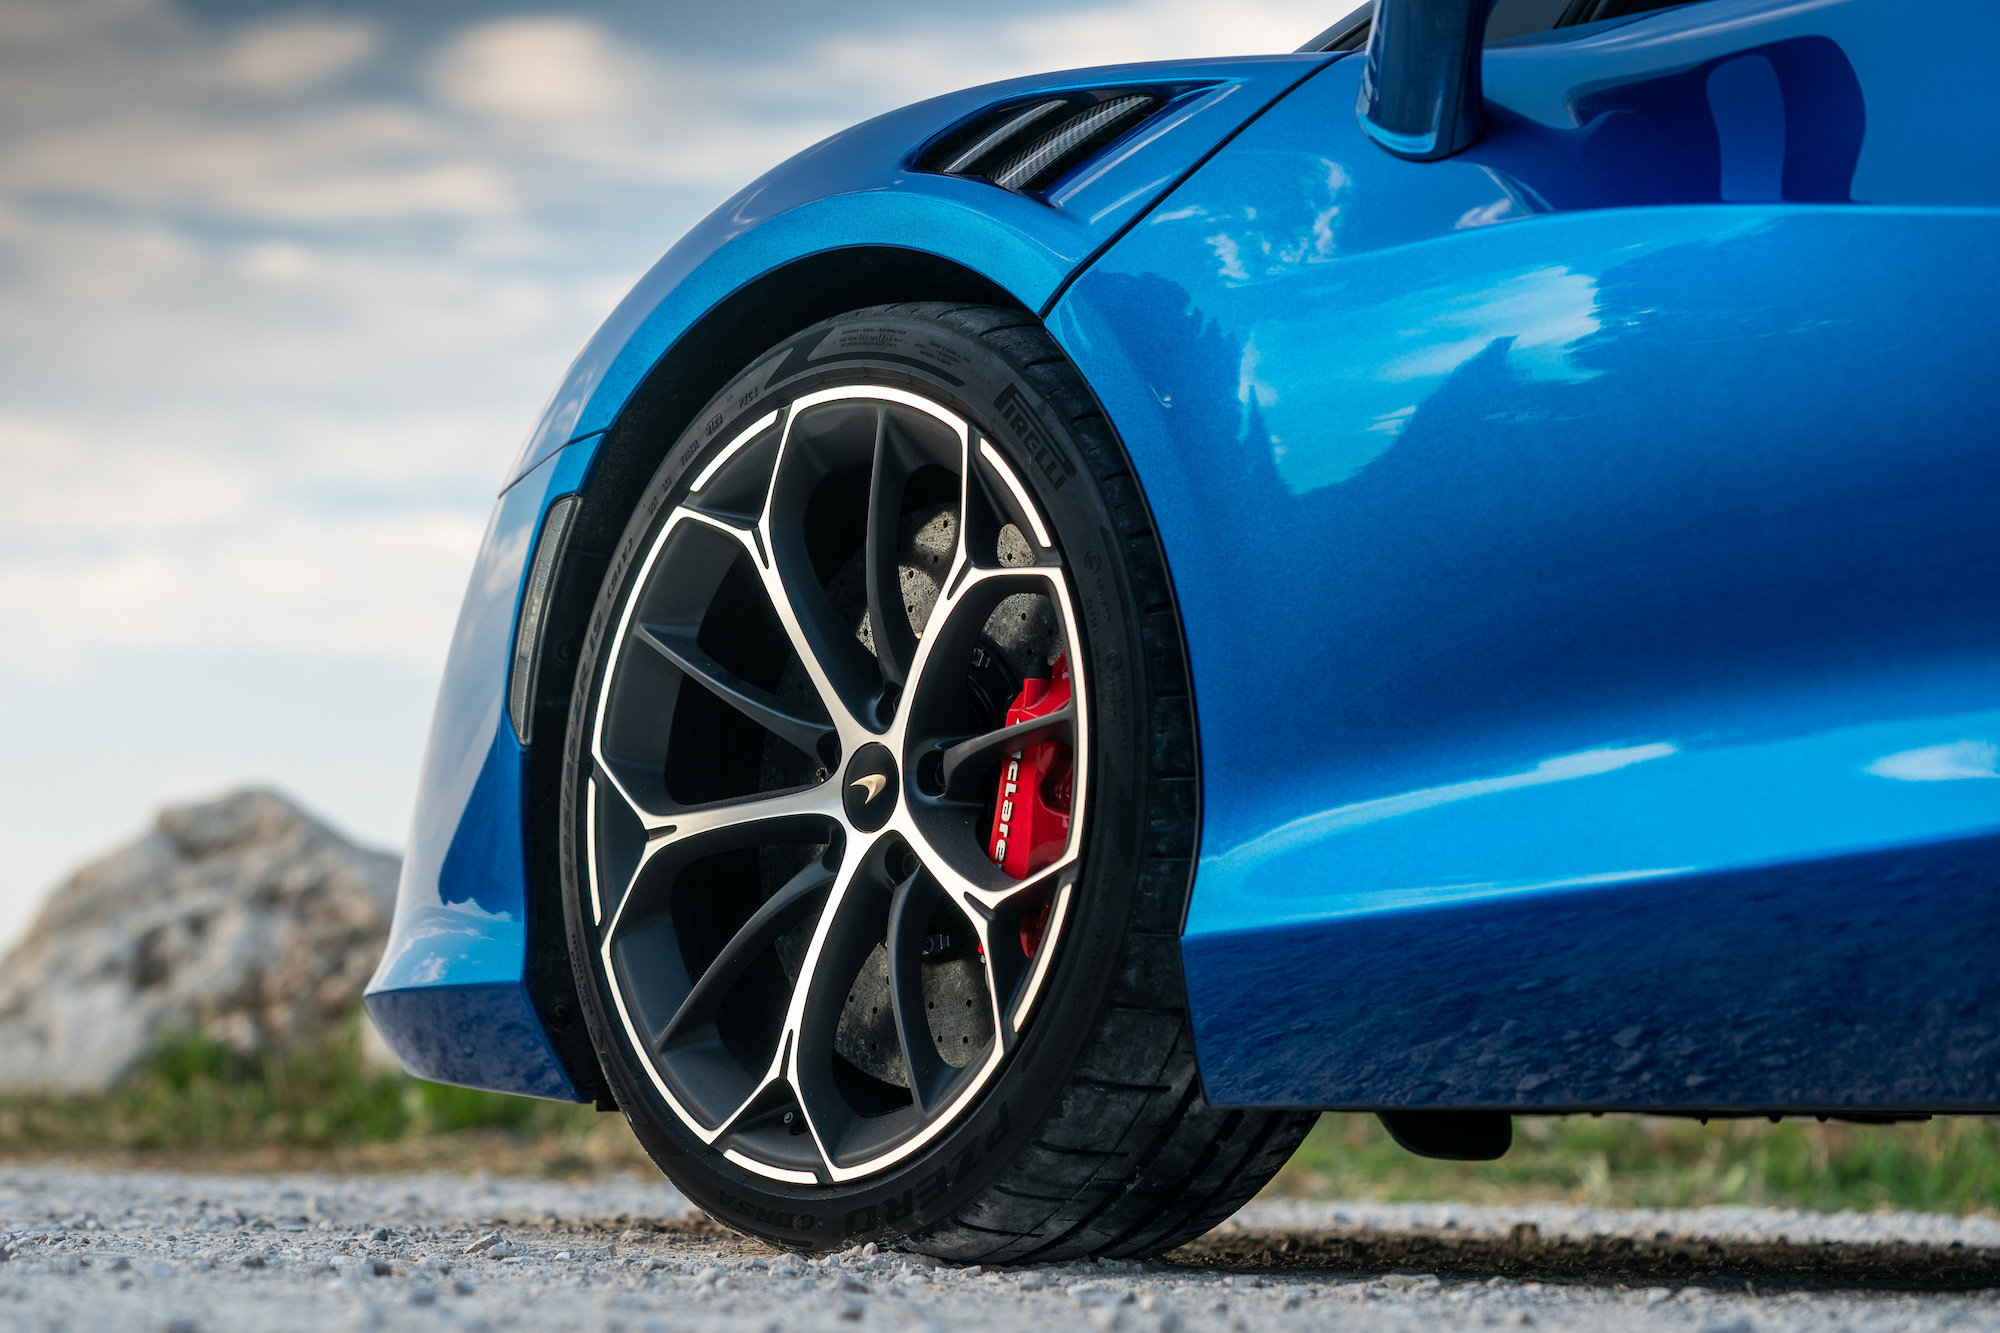 the tires of a sports car